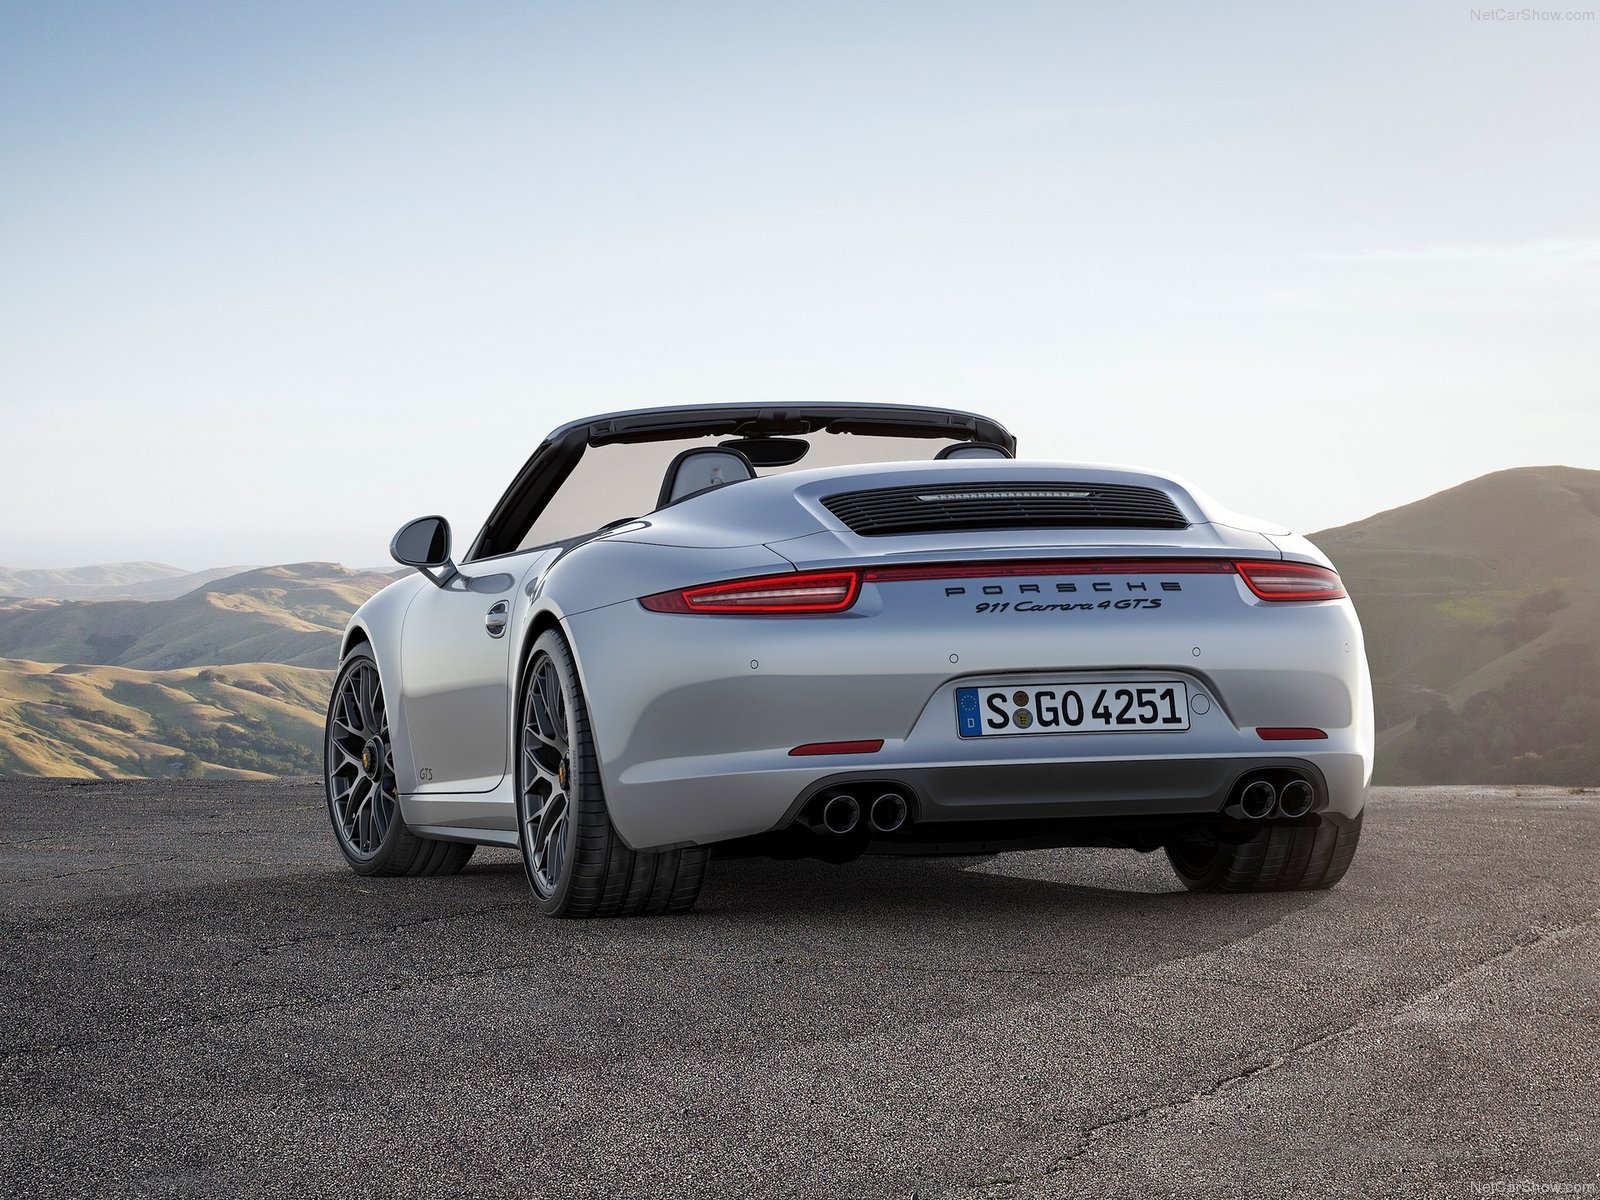 2015, Porsche 911, Carrera gts, Coupe, Supercars, Cars, Germany Wallpaper